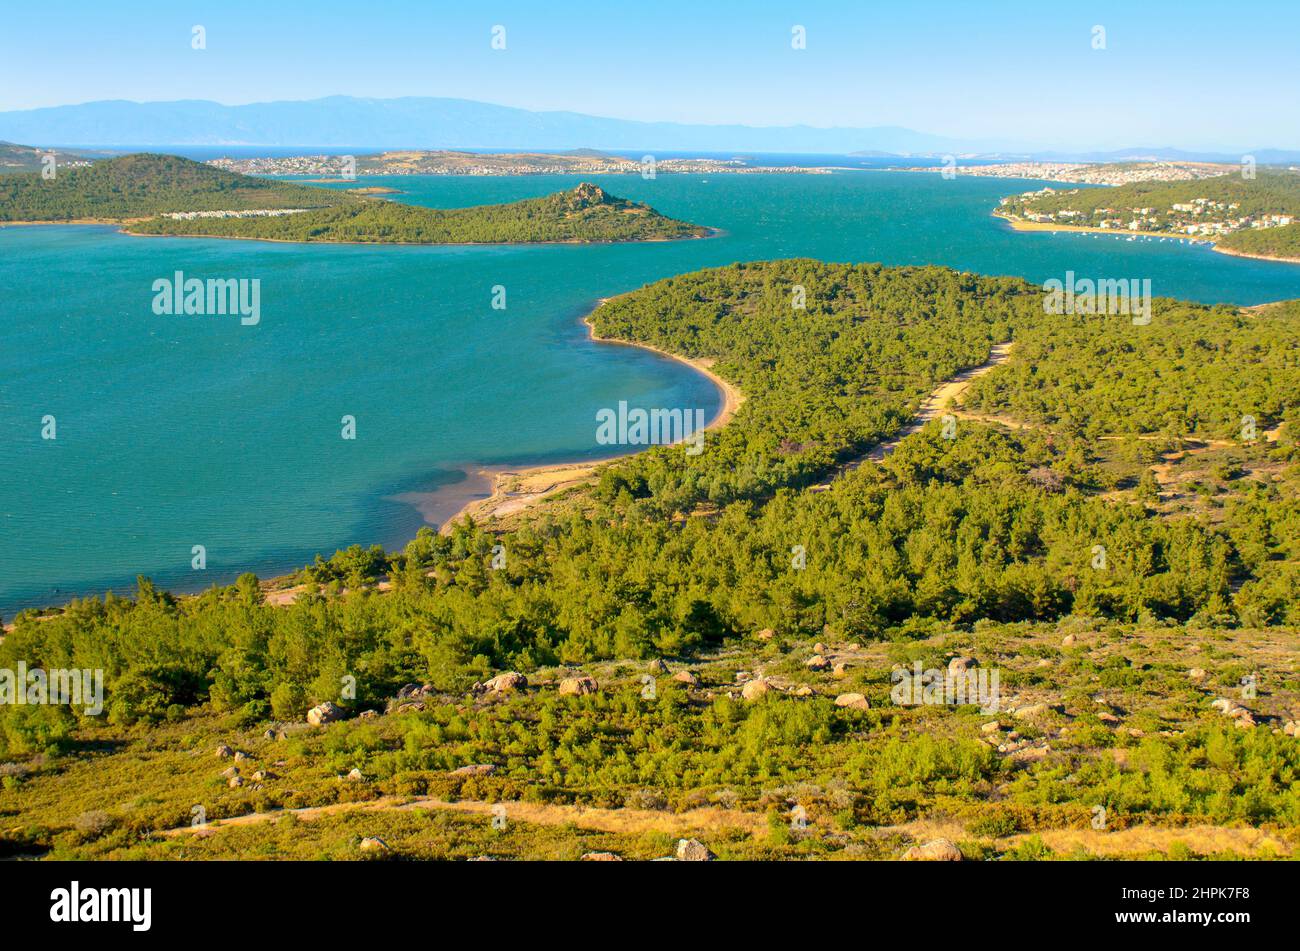 a view of the Mediterranean coastline, Greek islands, a lot of bays and bays. Stock Photo